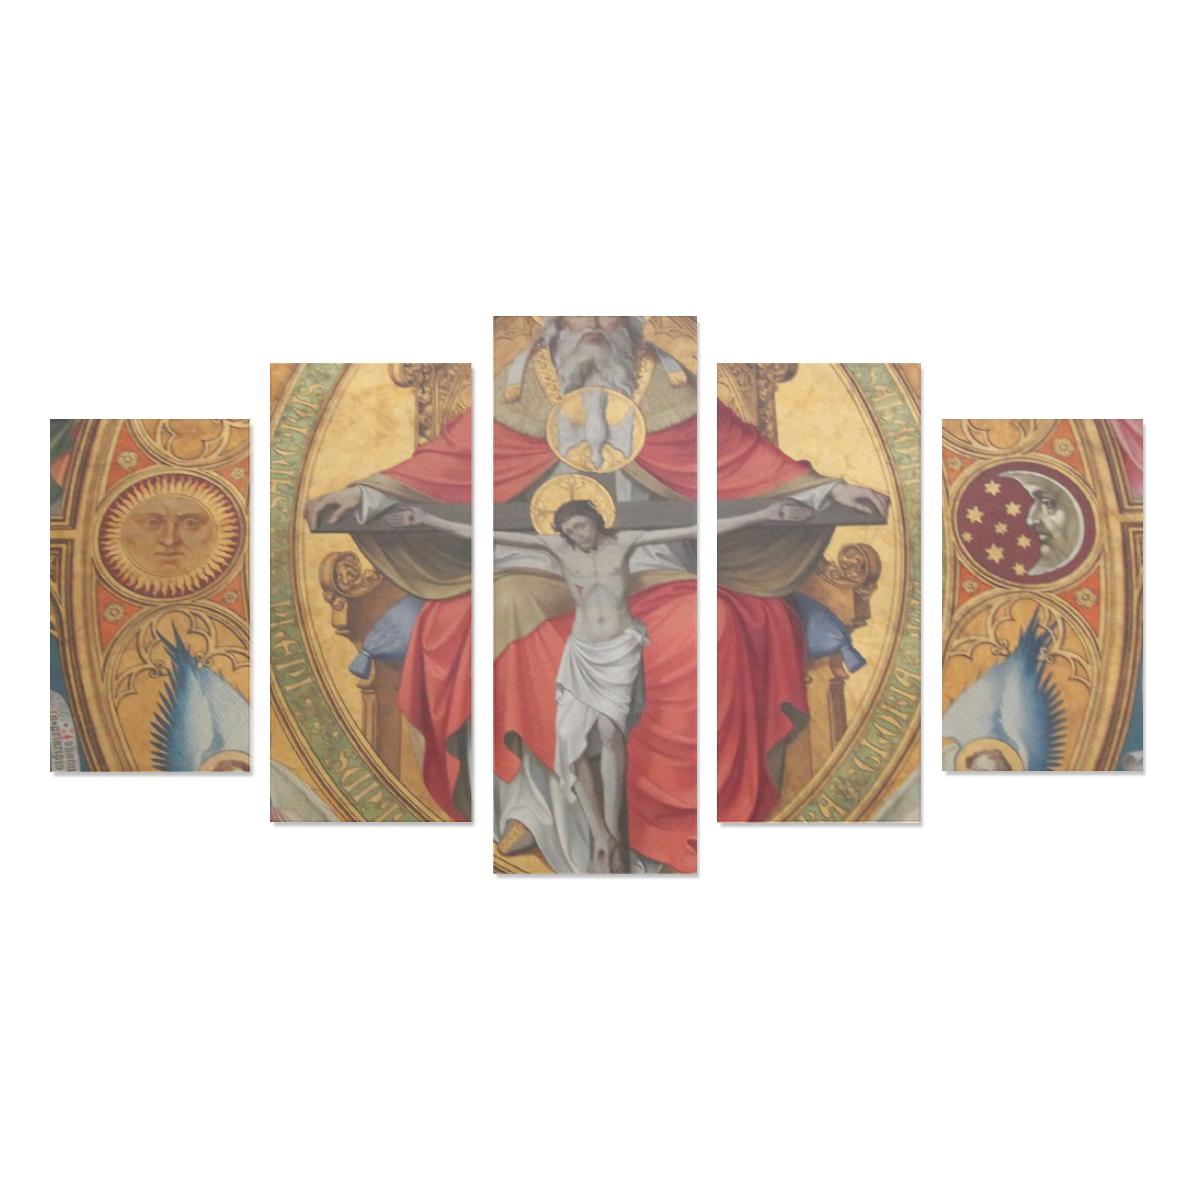 Vintage Jesus on Cross Oil Painting Canvas Print Sets A (No Frame)